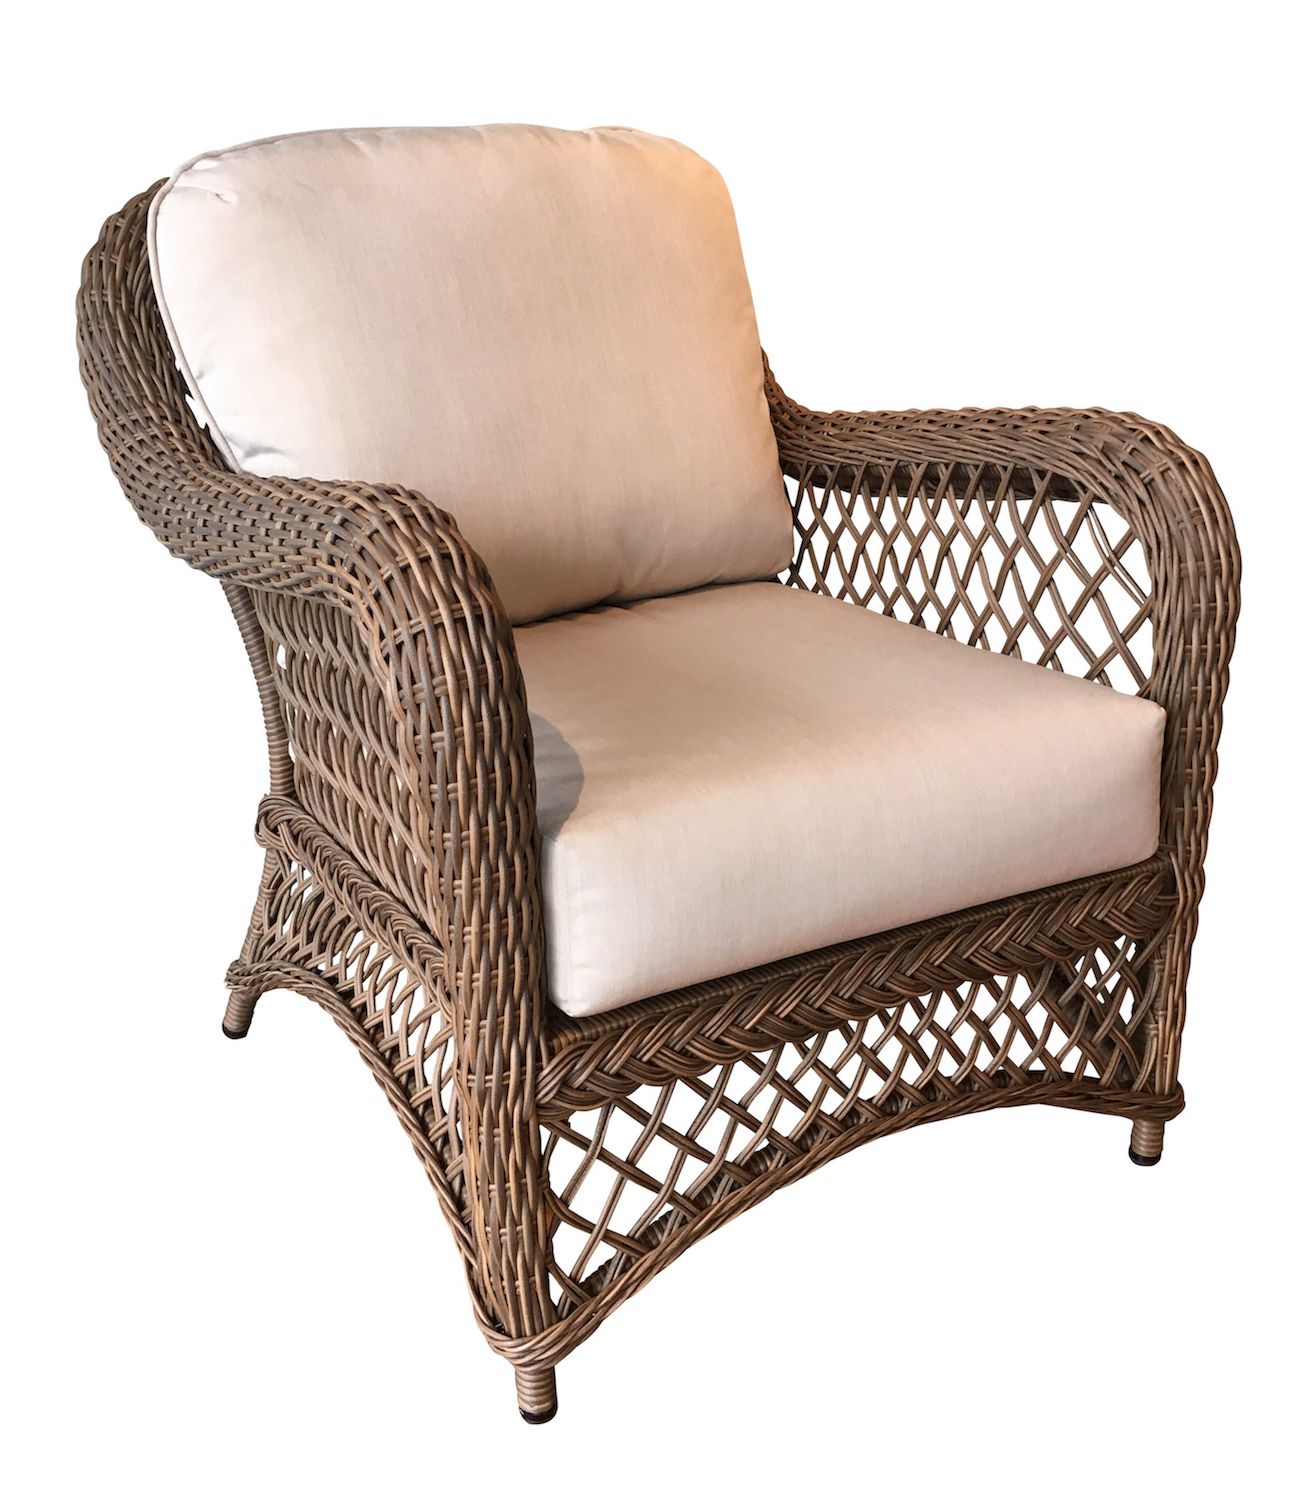 Outdoor Wicker Chair – Savannah Throughout Famous Rattan Wicker Outdoor Seating Sets (View 13 of 15)